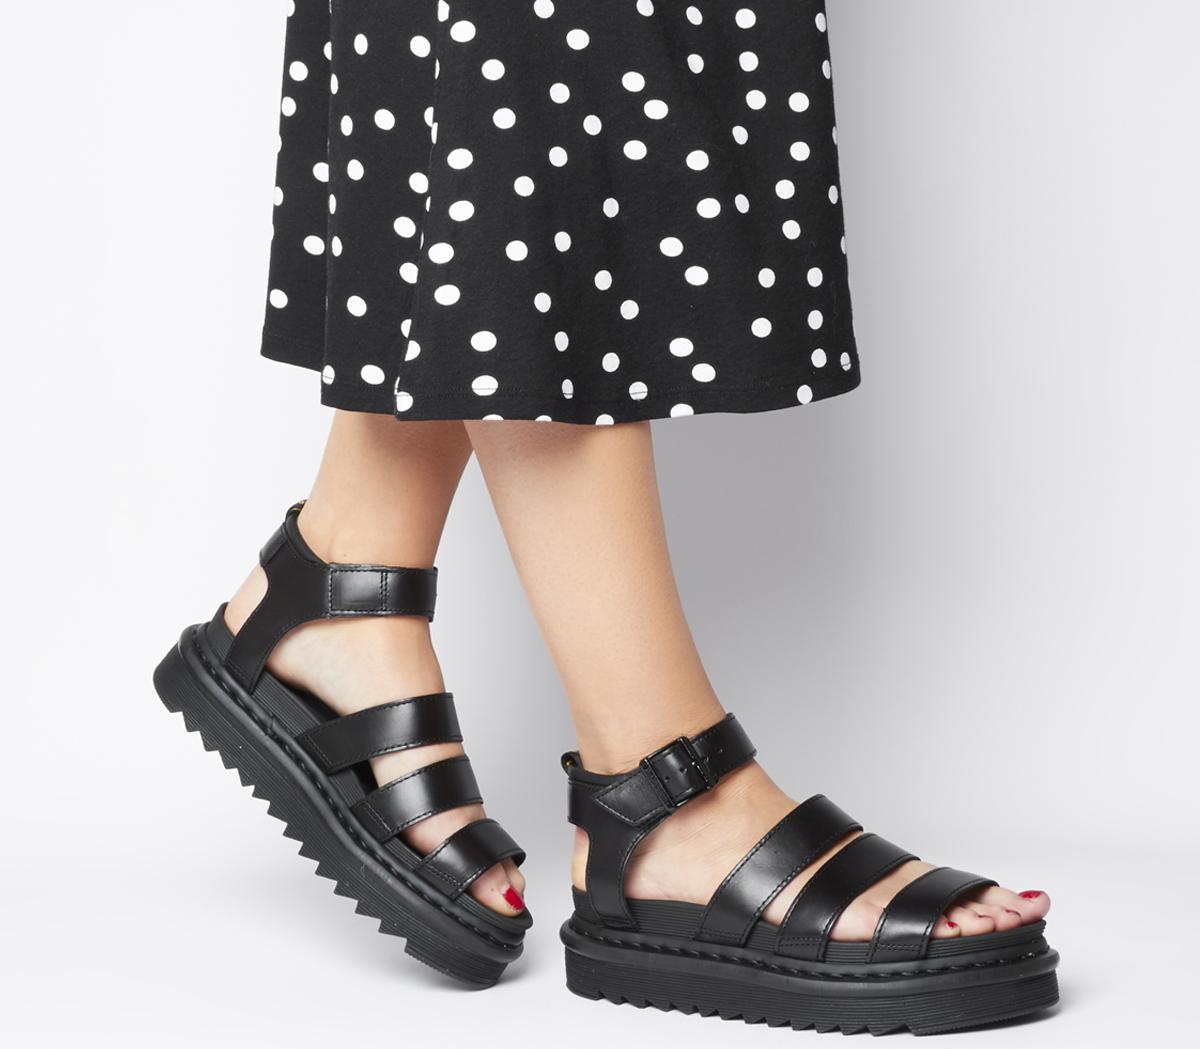 dr martens blaire leather strappy flat sandals in black